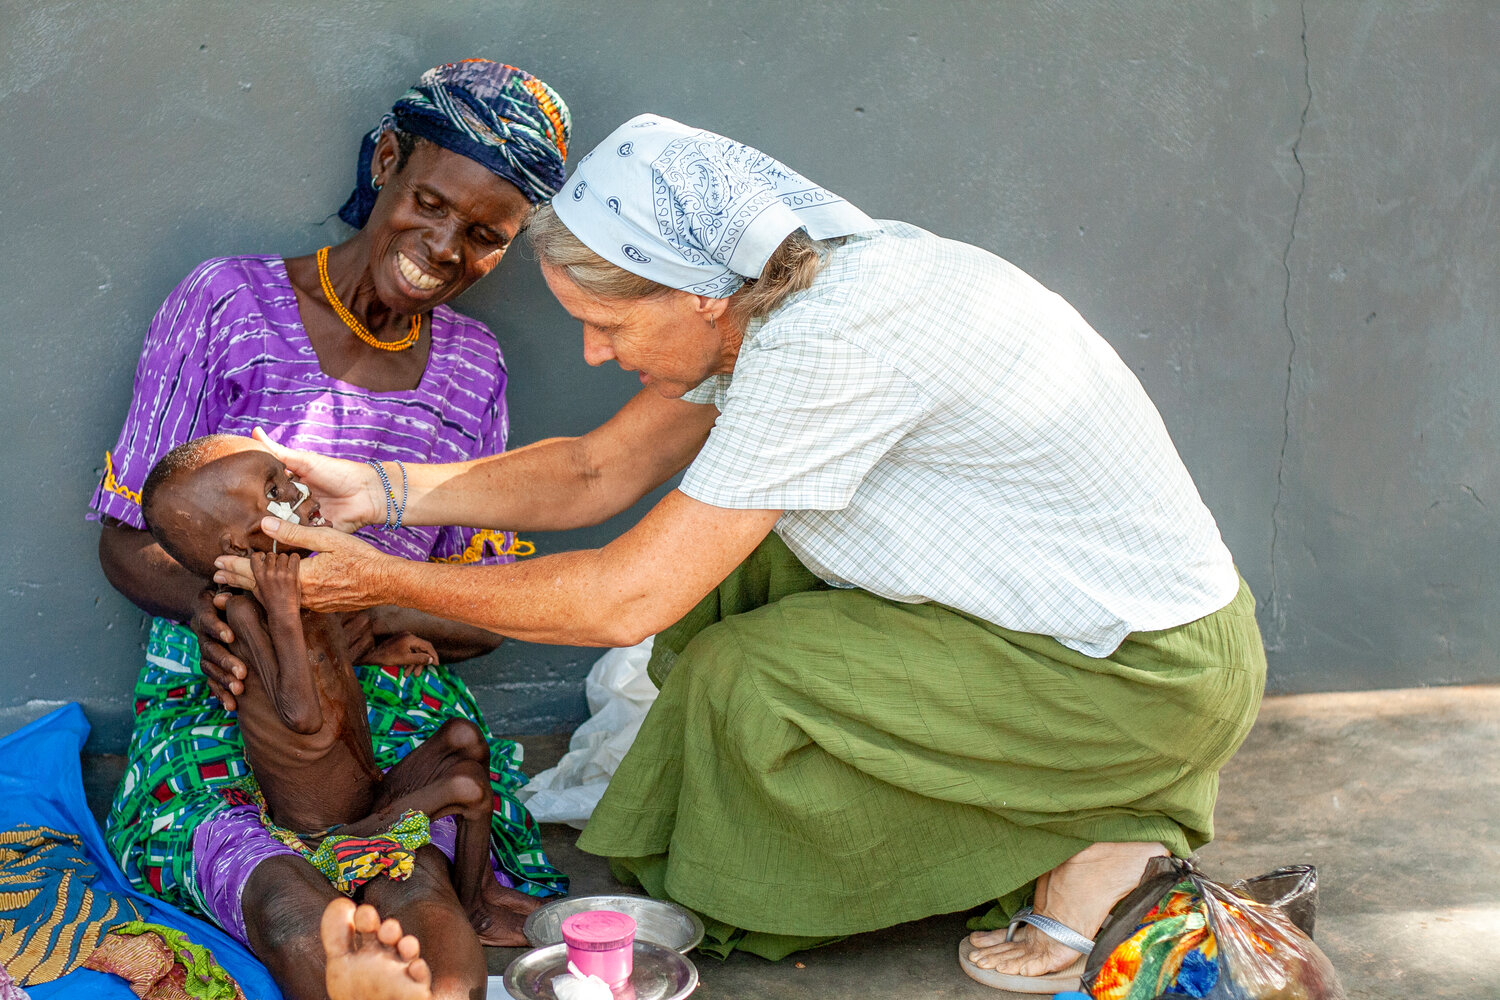 An IMB missionary midwife examines a malnourished Fulani child at the Baptist Medical Centre's Nutritional Rehabilitation Center in Nalerigu, Ghana. (Photo/International Mission Board)